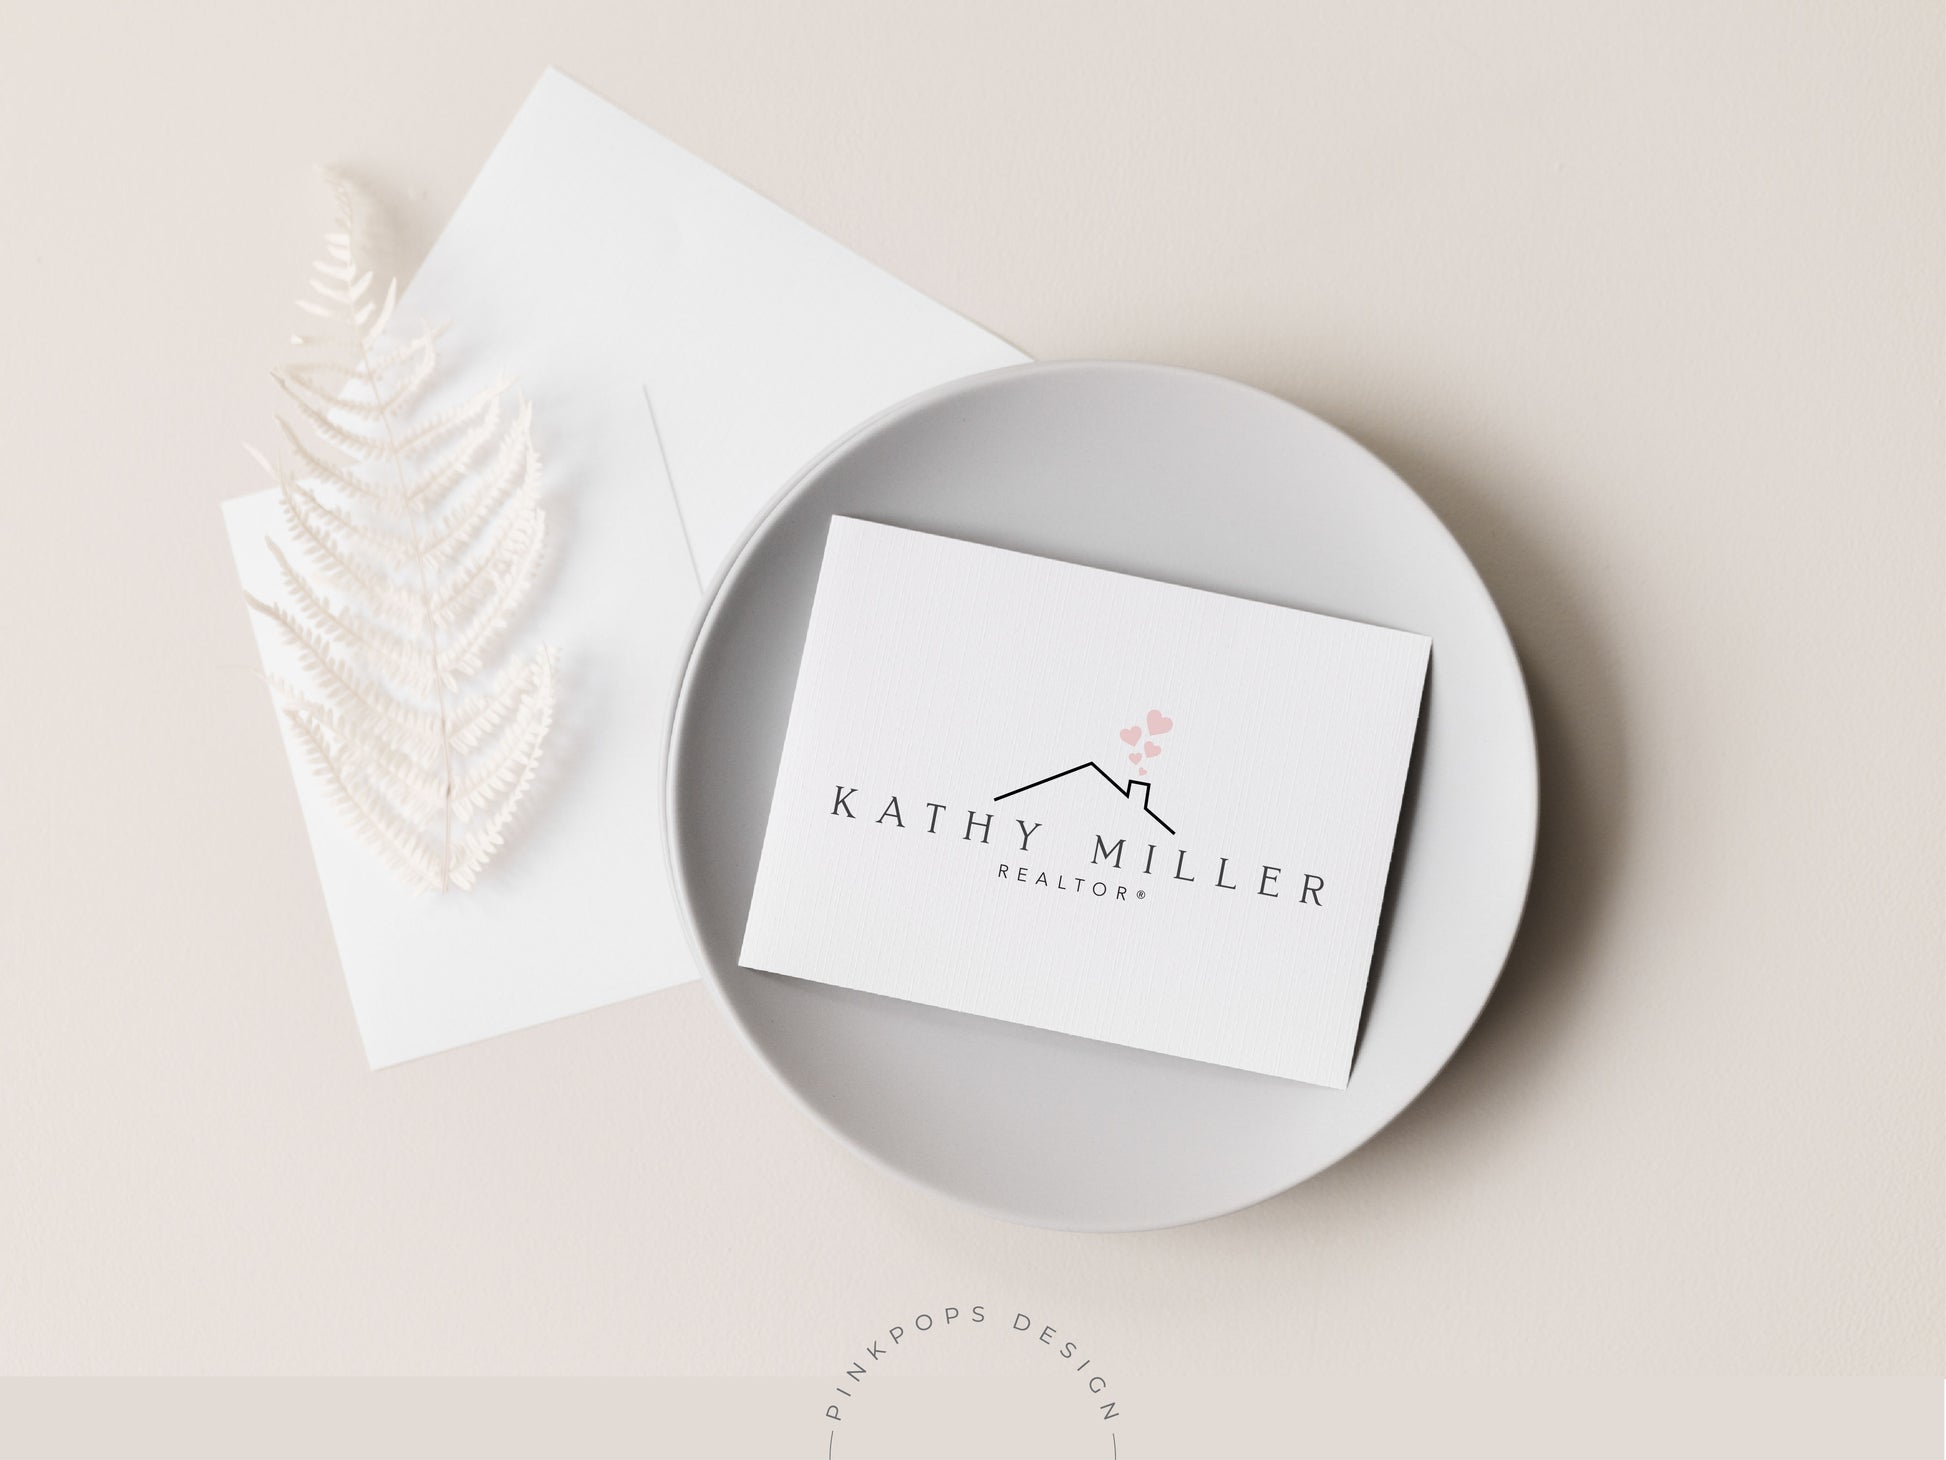 Real Estate Kathy Miller Logo Template - Minimalist and refined logo design for real estate professionals, offering a distinctive and sophisticated visual identity.